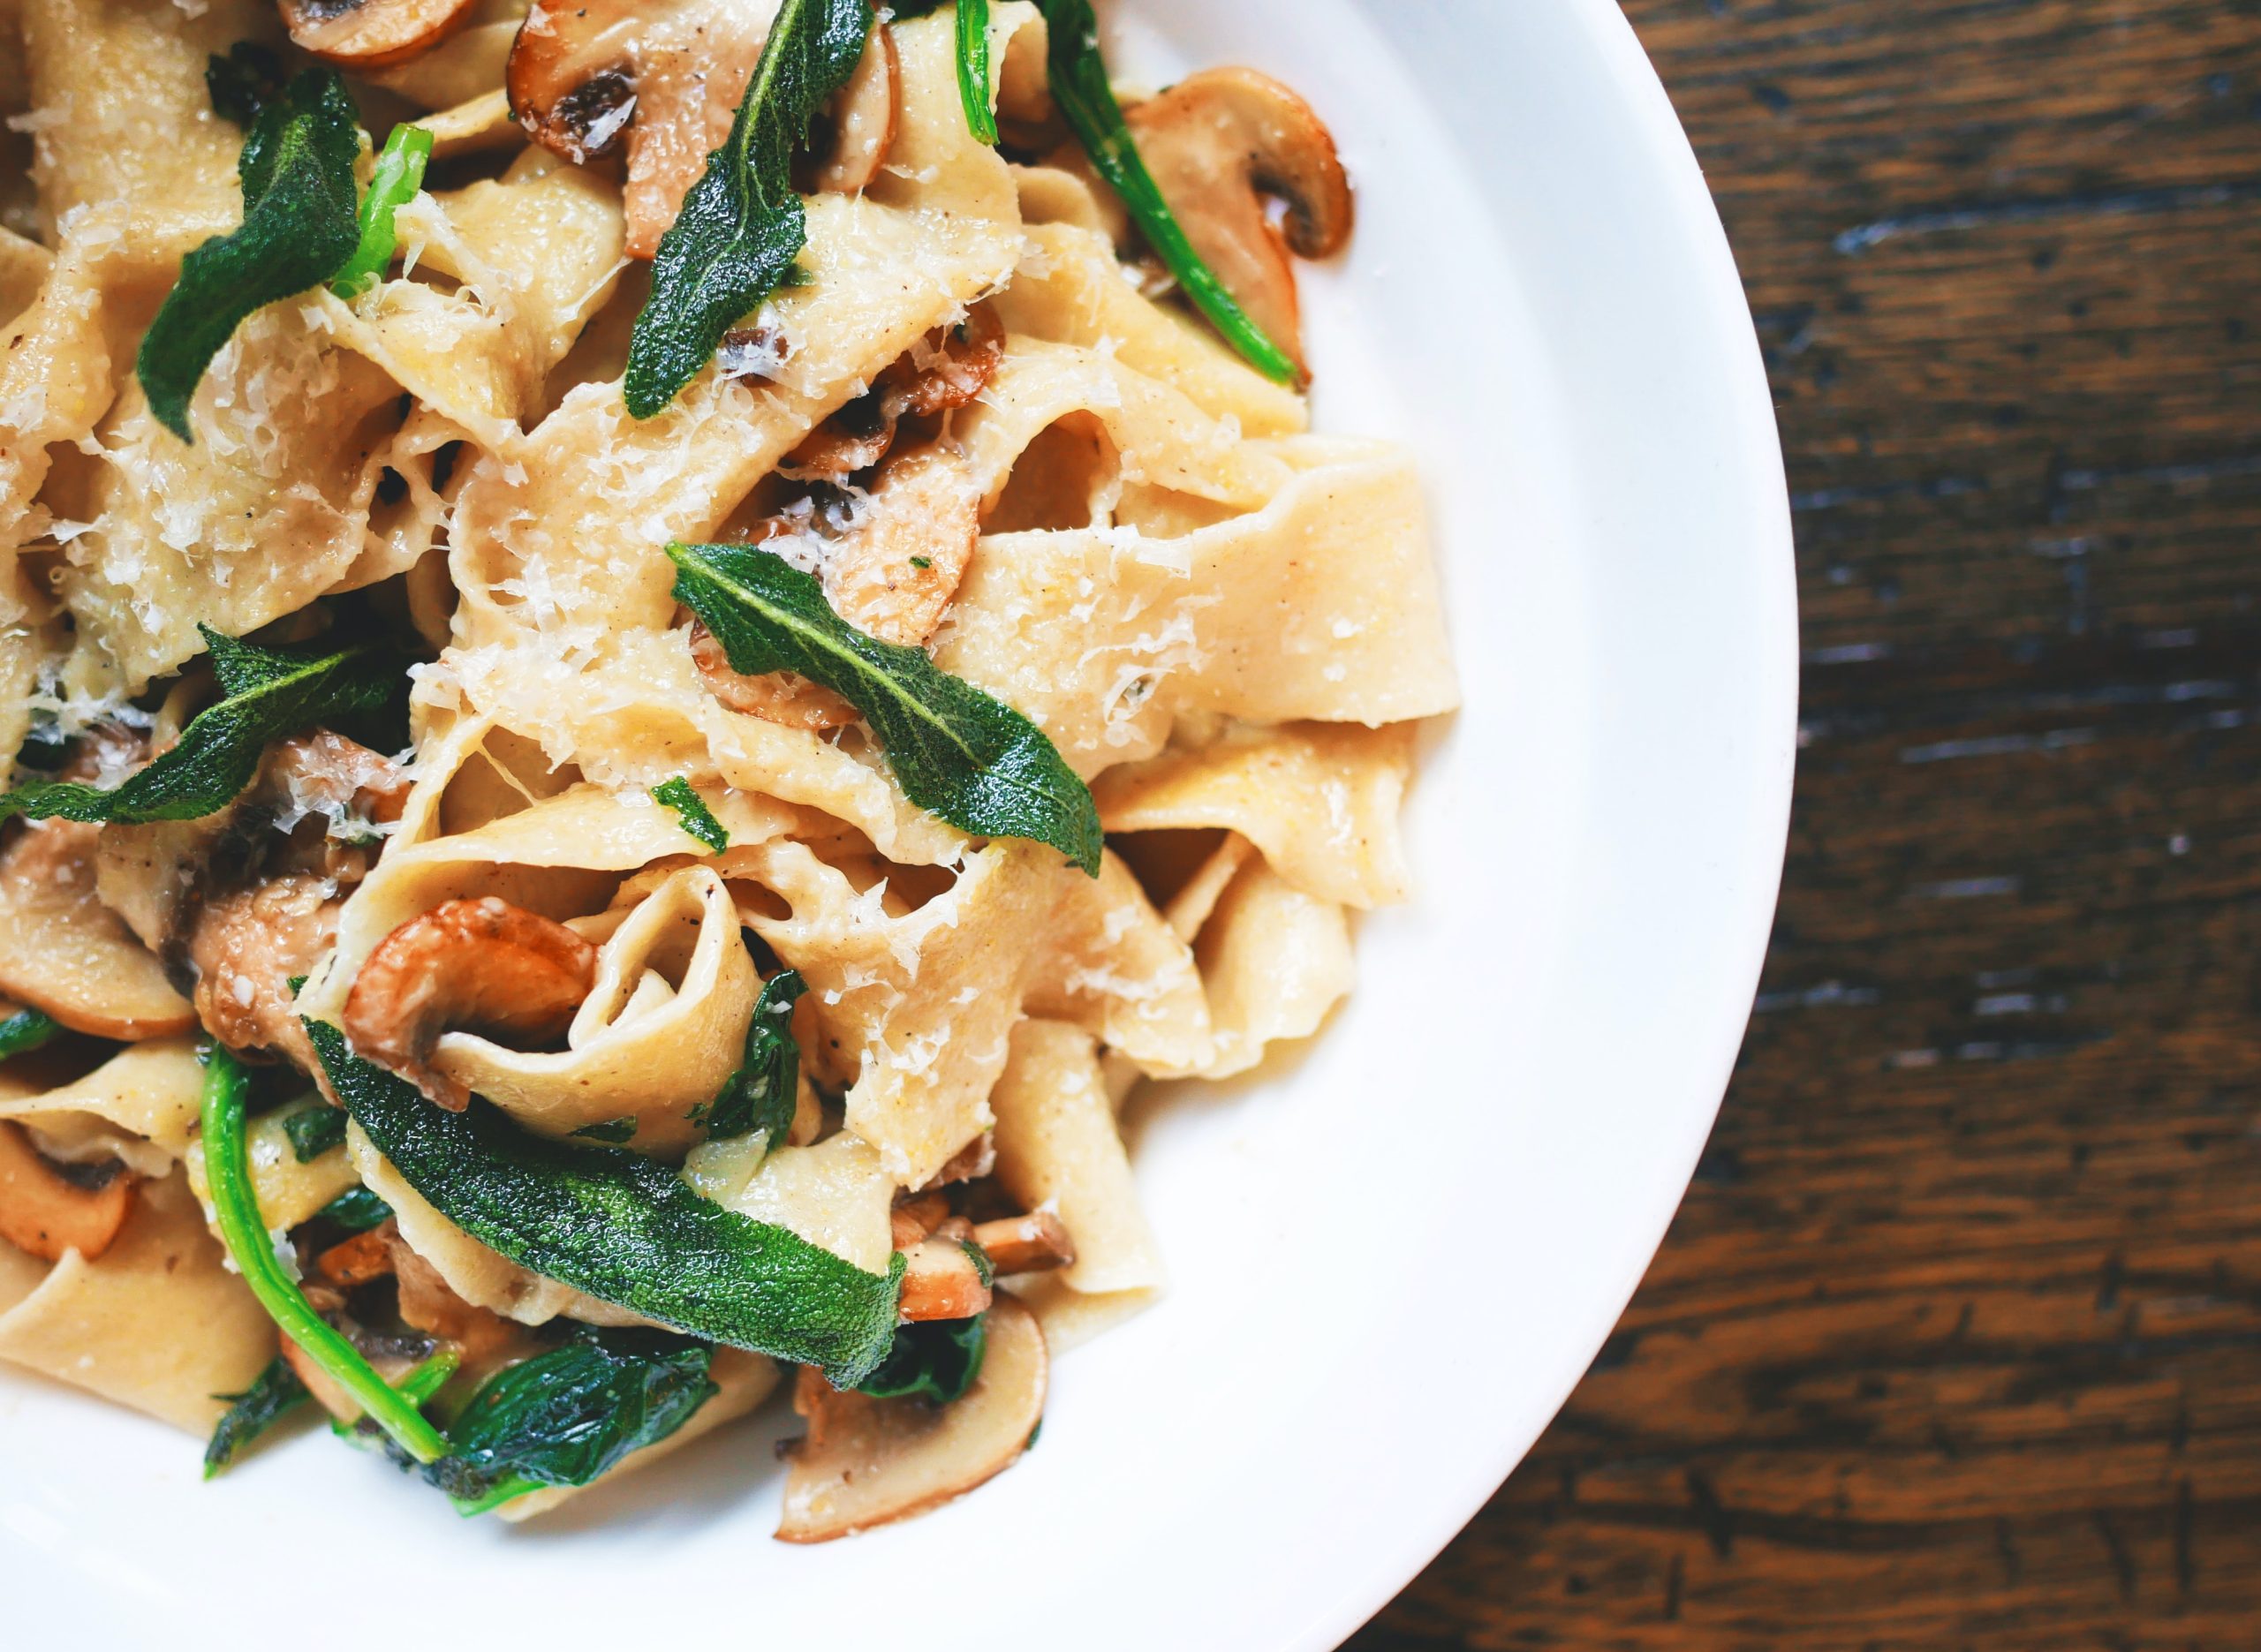 Best Eats: Feel at Home with These Homemade Pastas